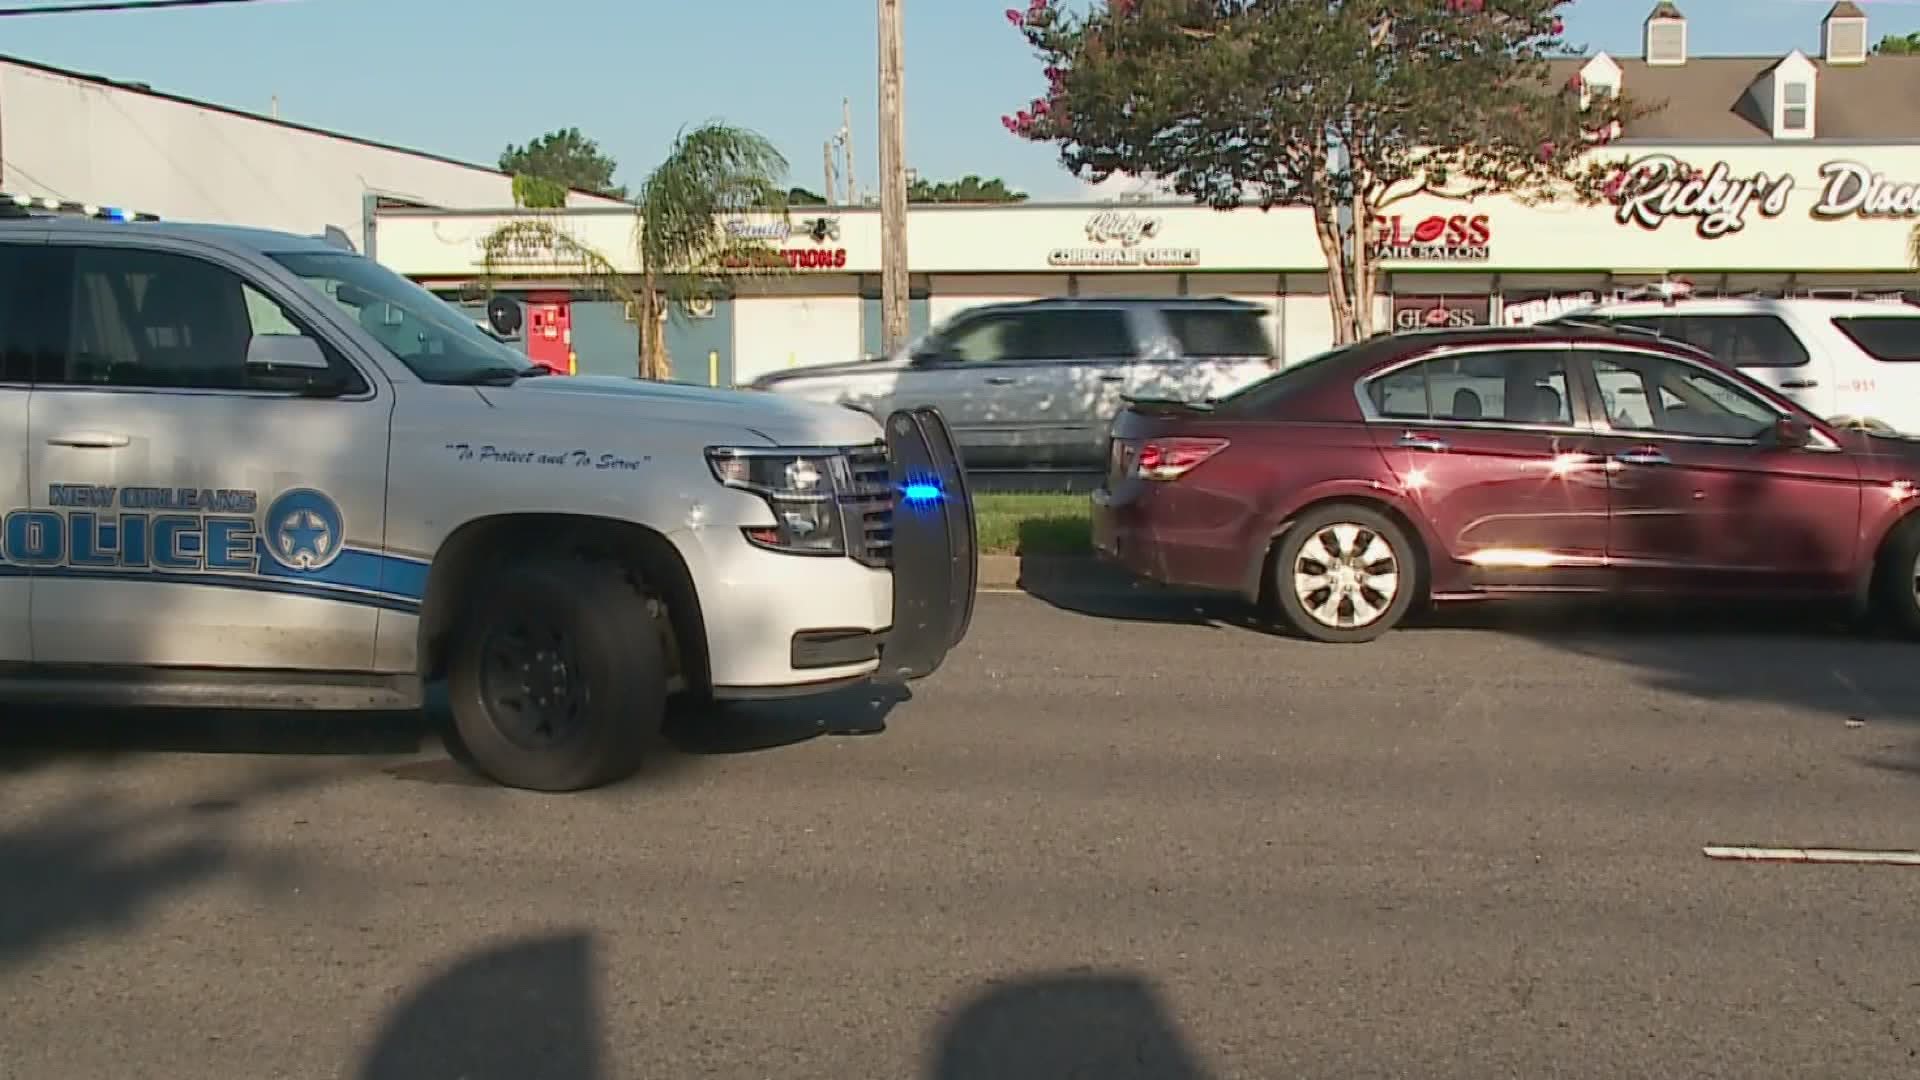 A police chase that started in New Orleans after a reported carjacking, ended in a crash in Kenner Thursday morning.